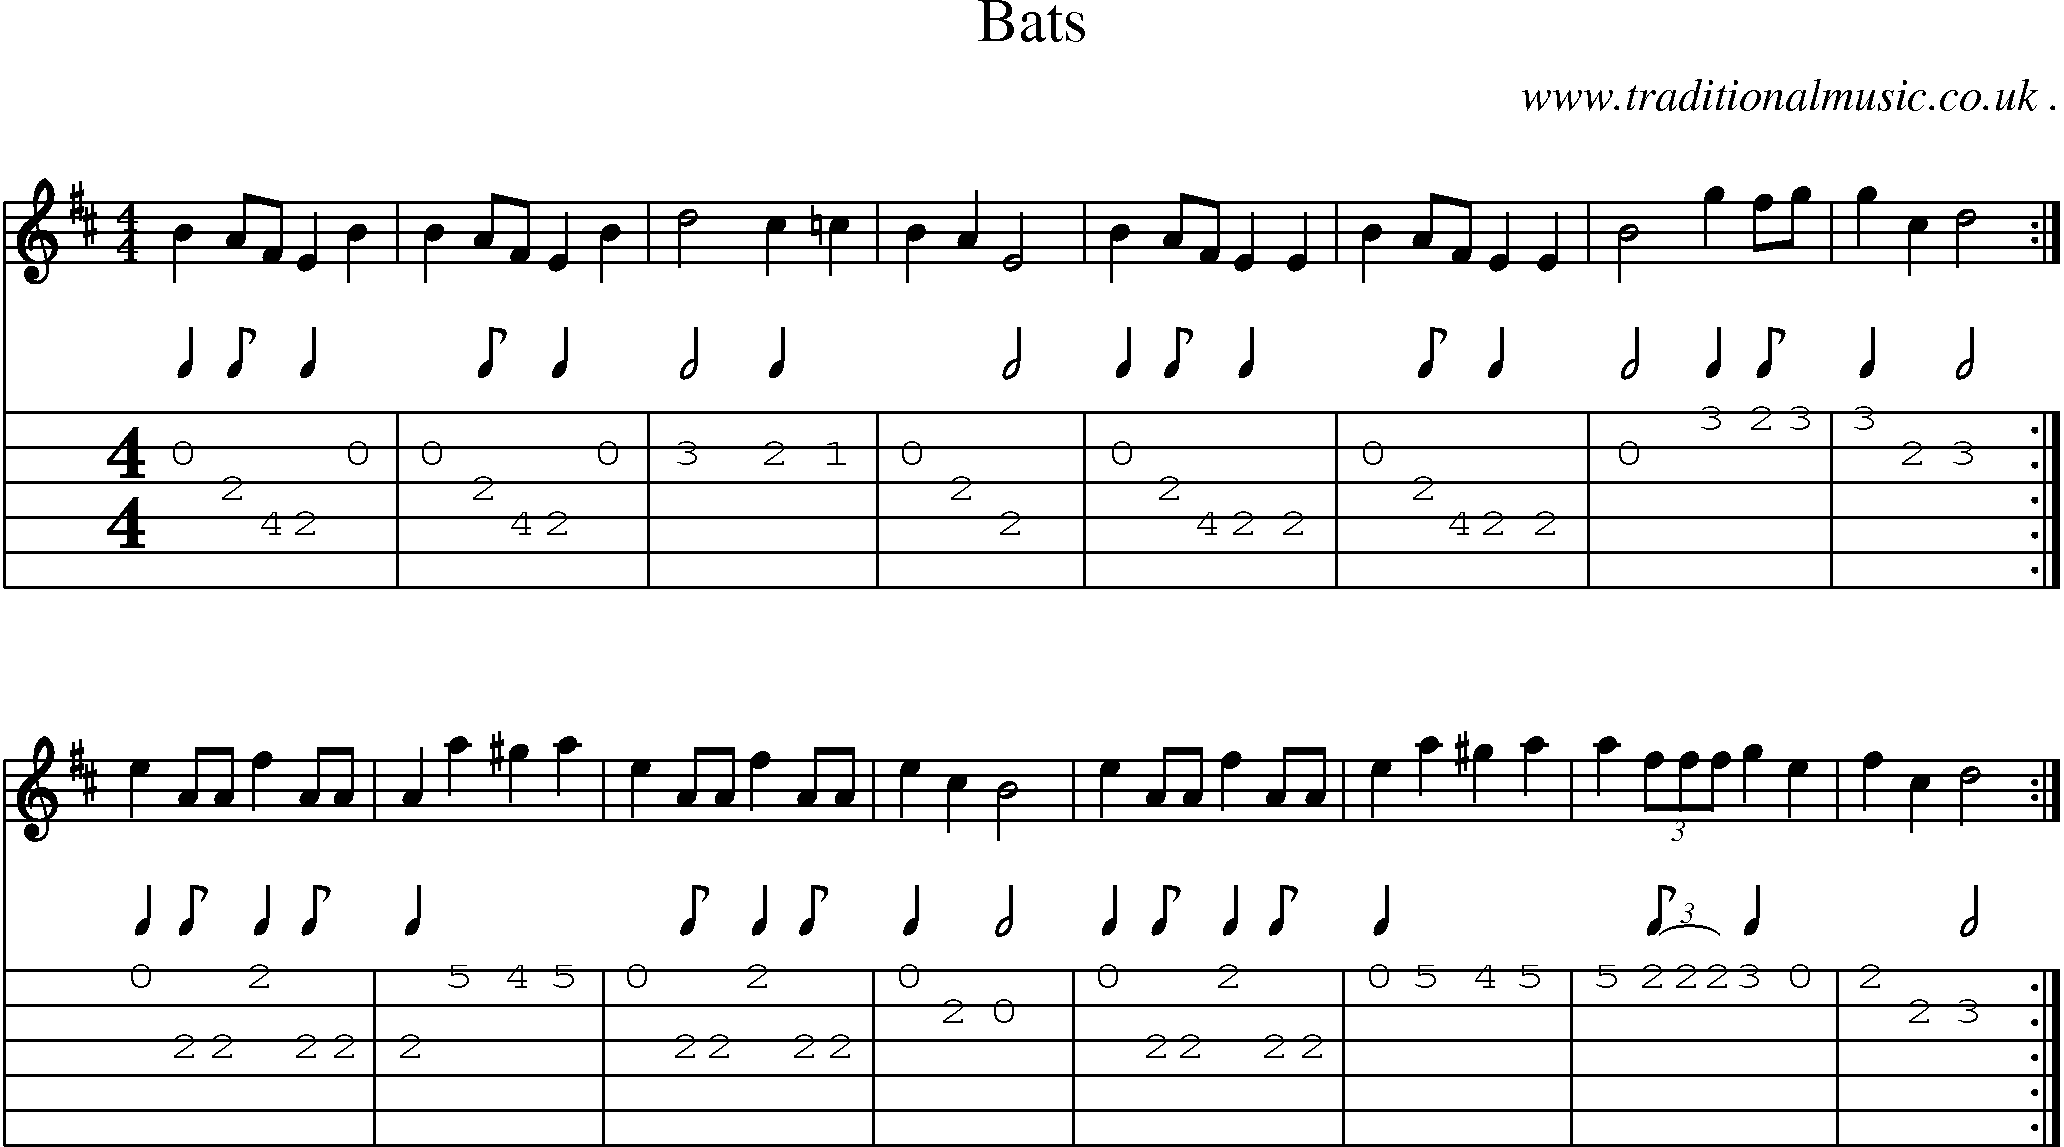 Sheet-Music and Guitar Tabs for Bats